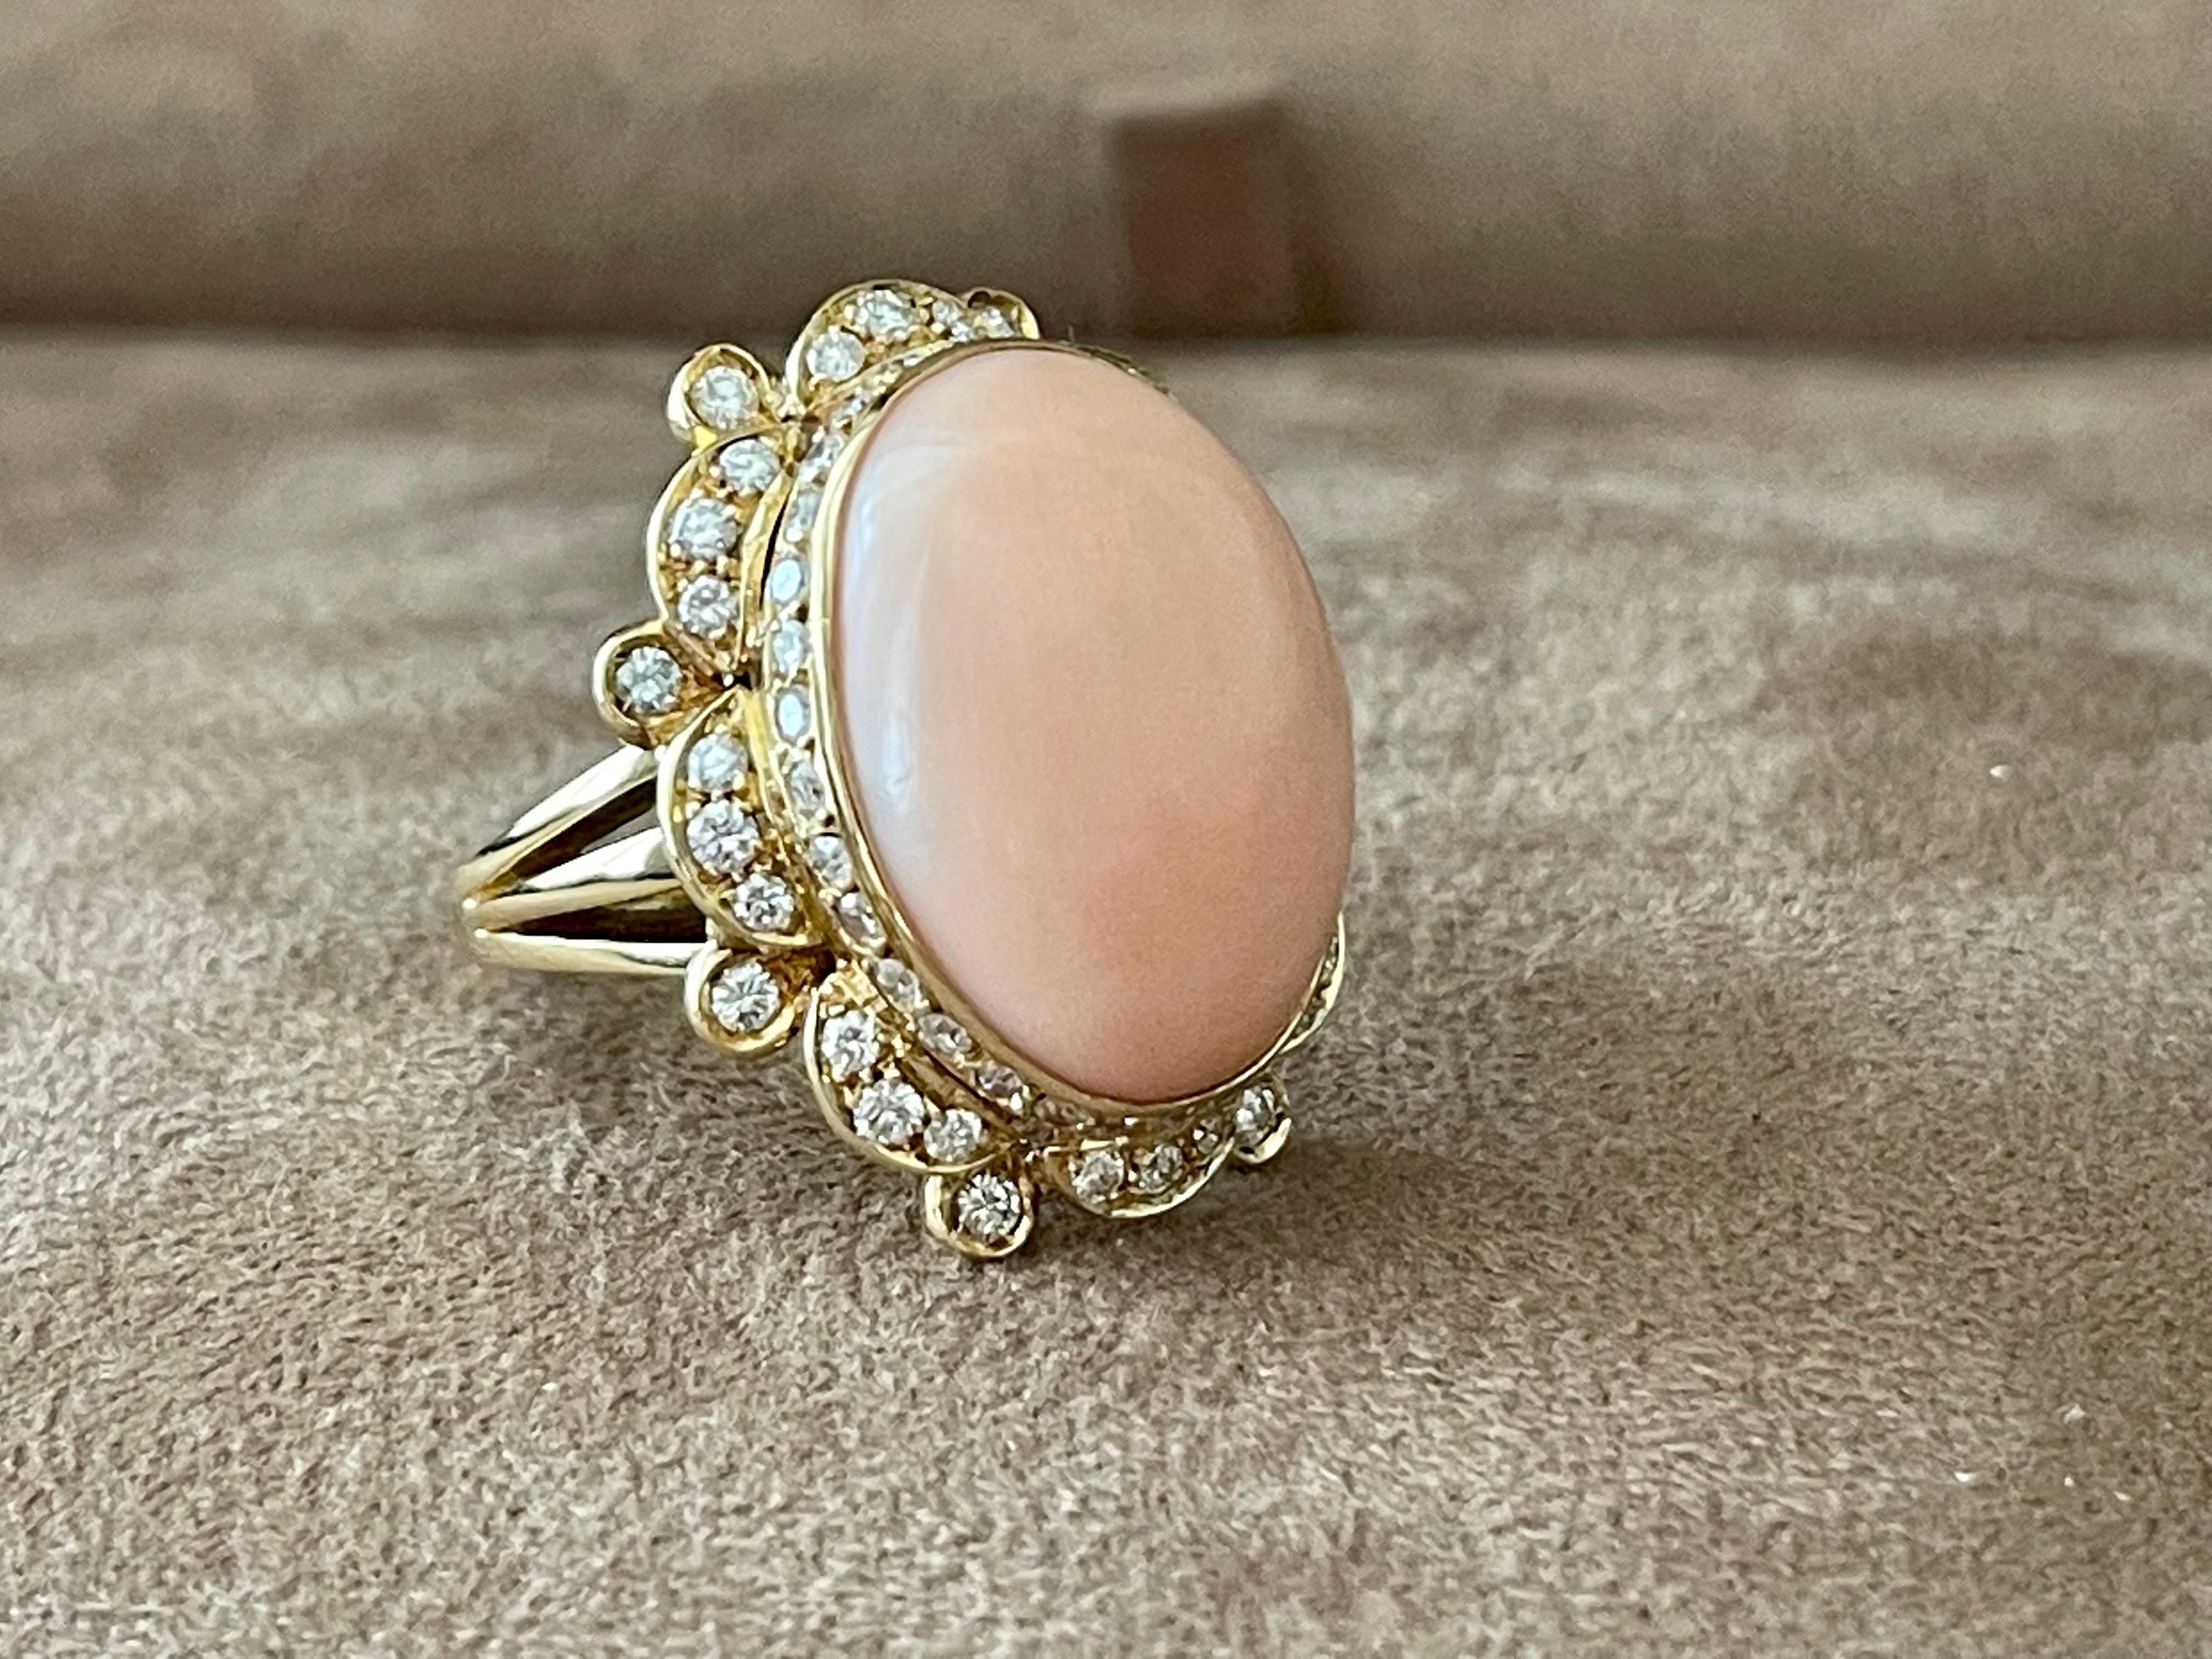 18 K Yellow Gold Vintage Cocktail Ring with Diamonds Angel Skin Coral For Sale 4